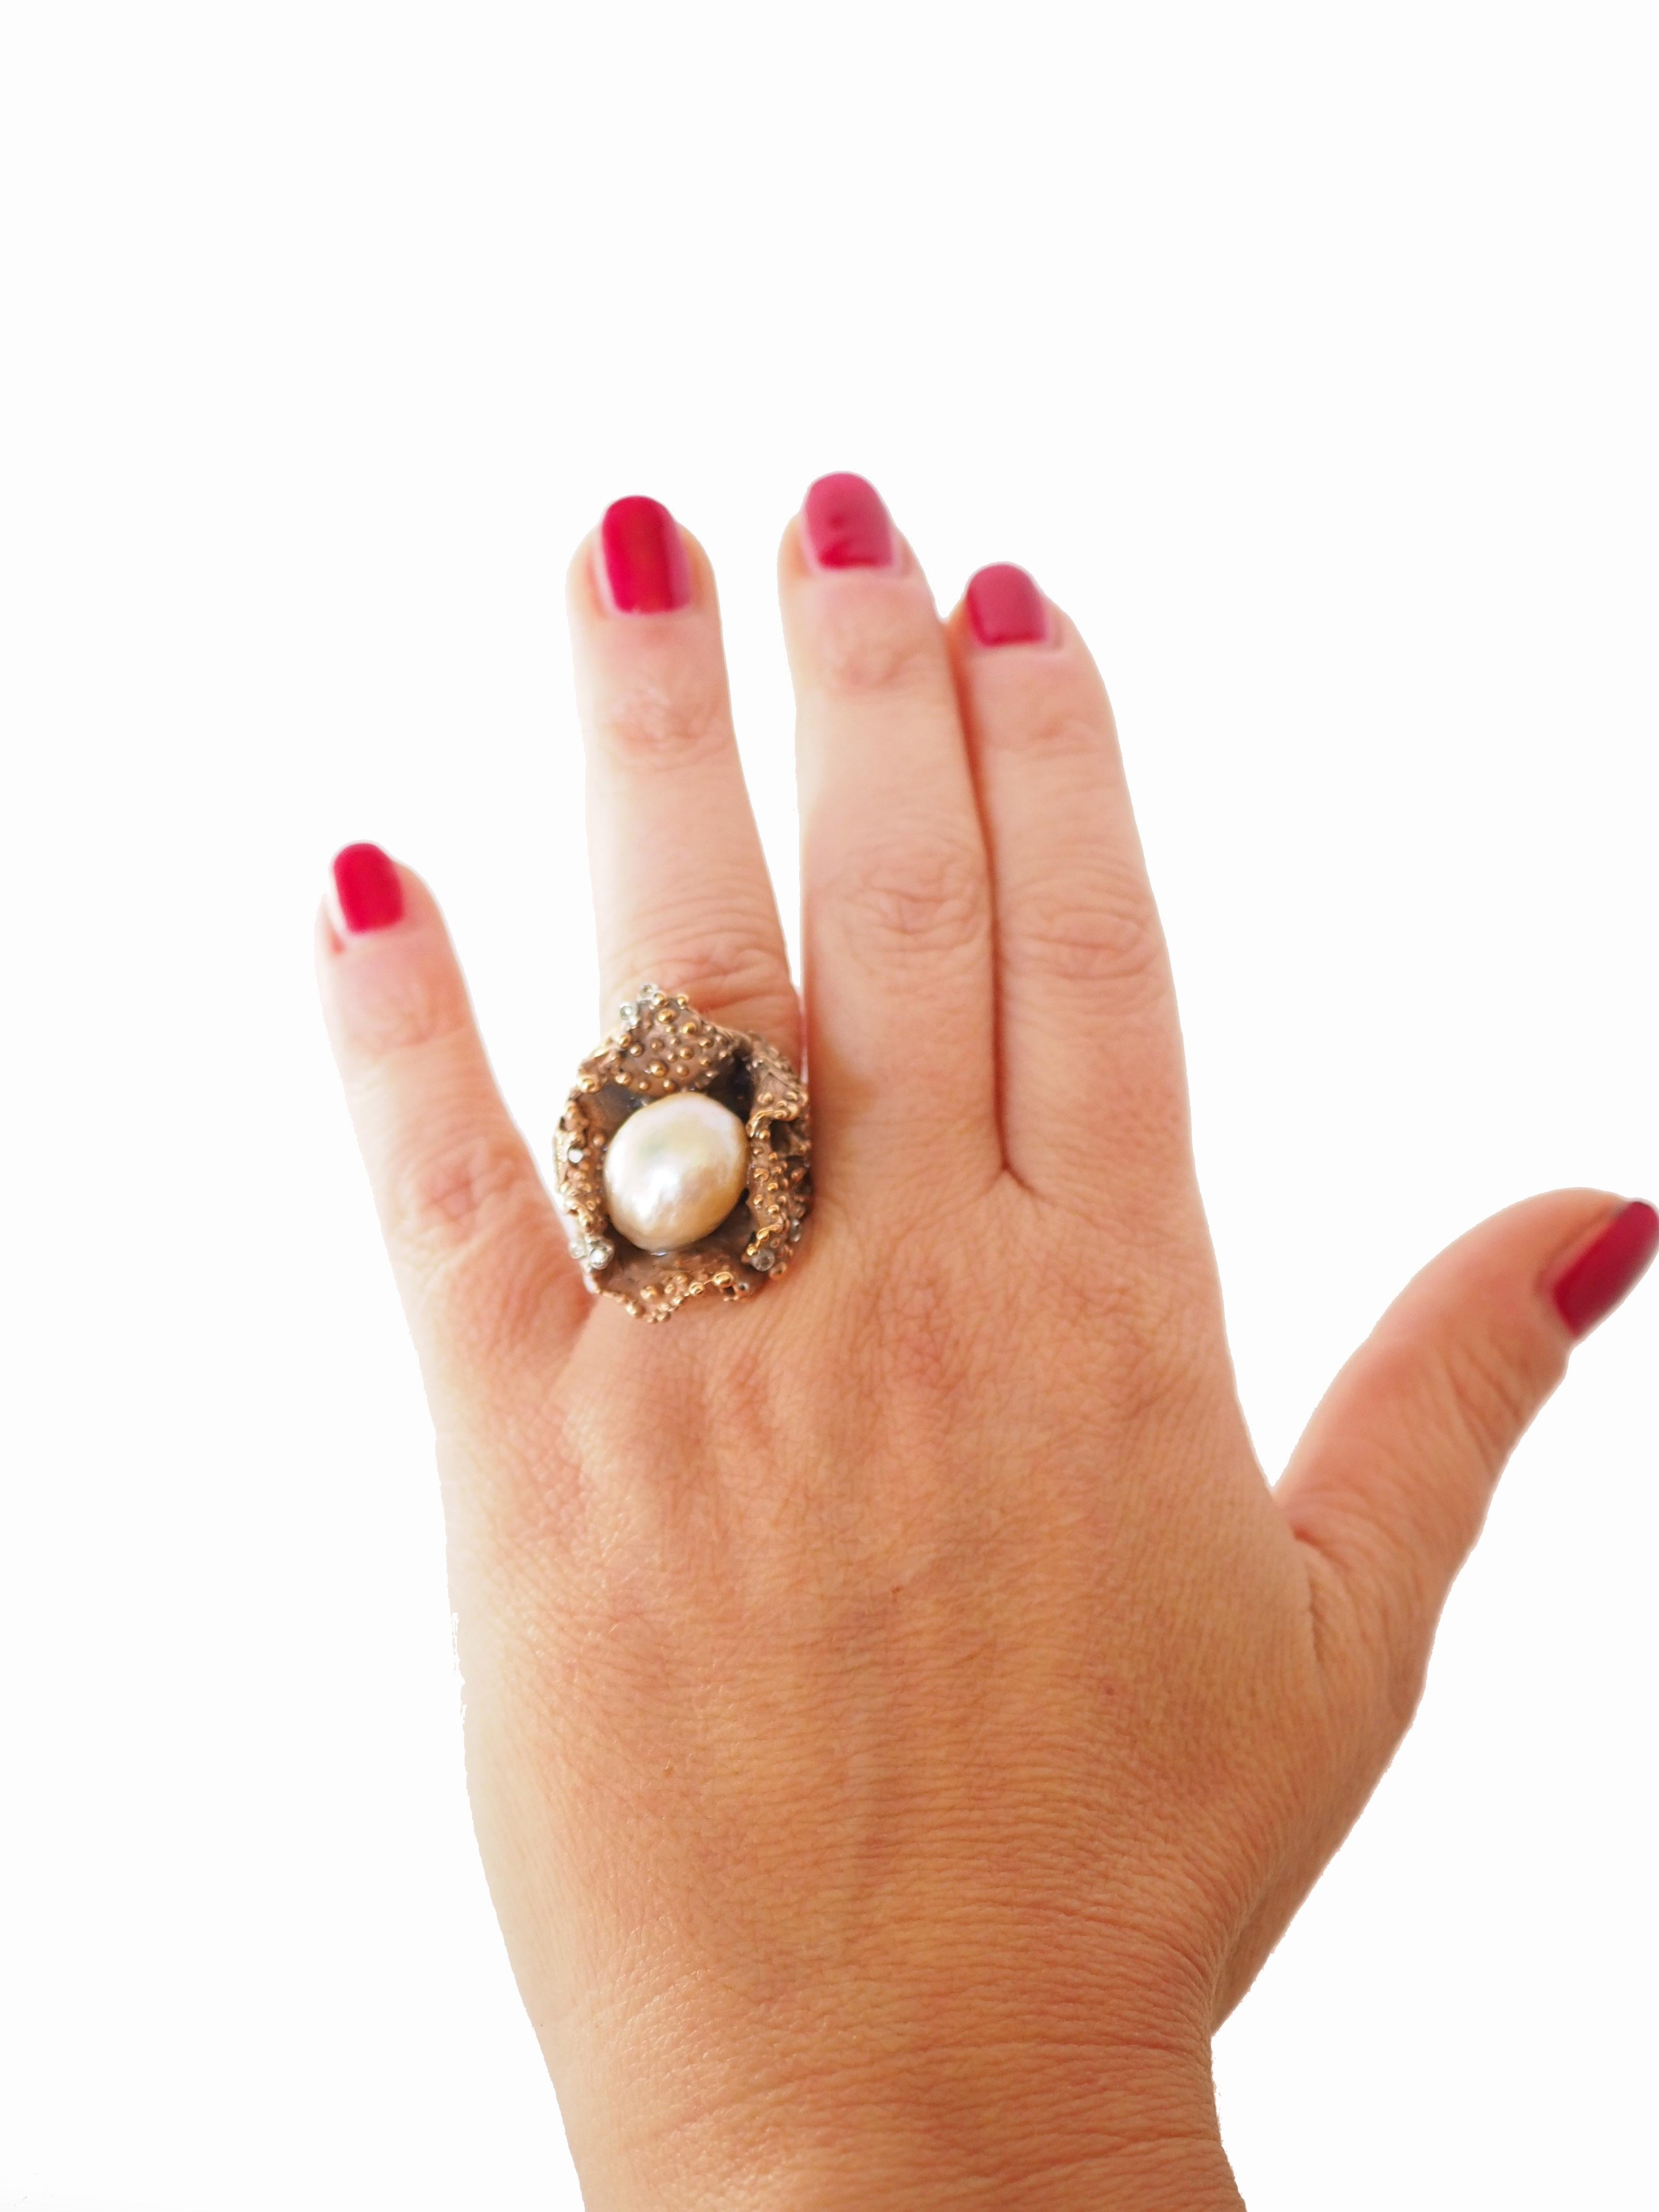  Natural Pearls Diamonds cts 0,70  Bronze Ring. Size 14 eu
All Giulia Colussi jewelry is new and has never been previously owned or worn. Each item will arrive at your door beautifully gift wrapped in our boxes, put inside an elegant pouch or jewel